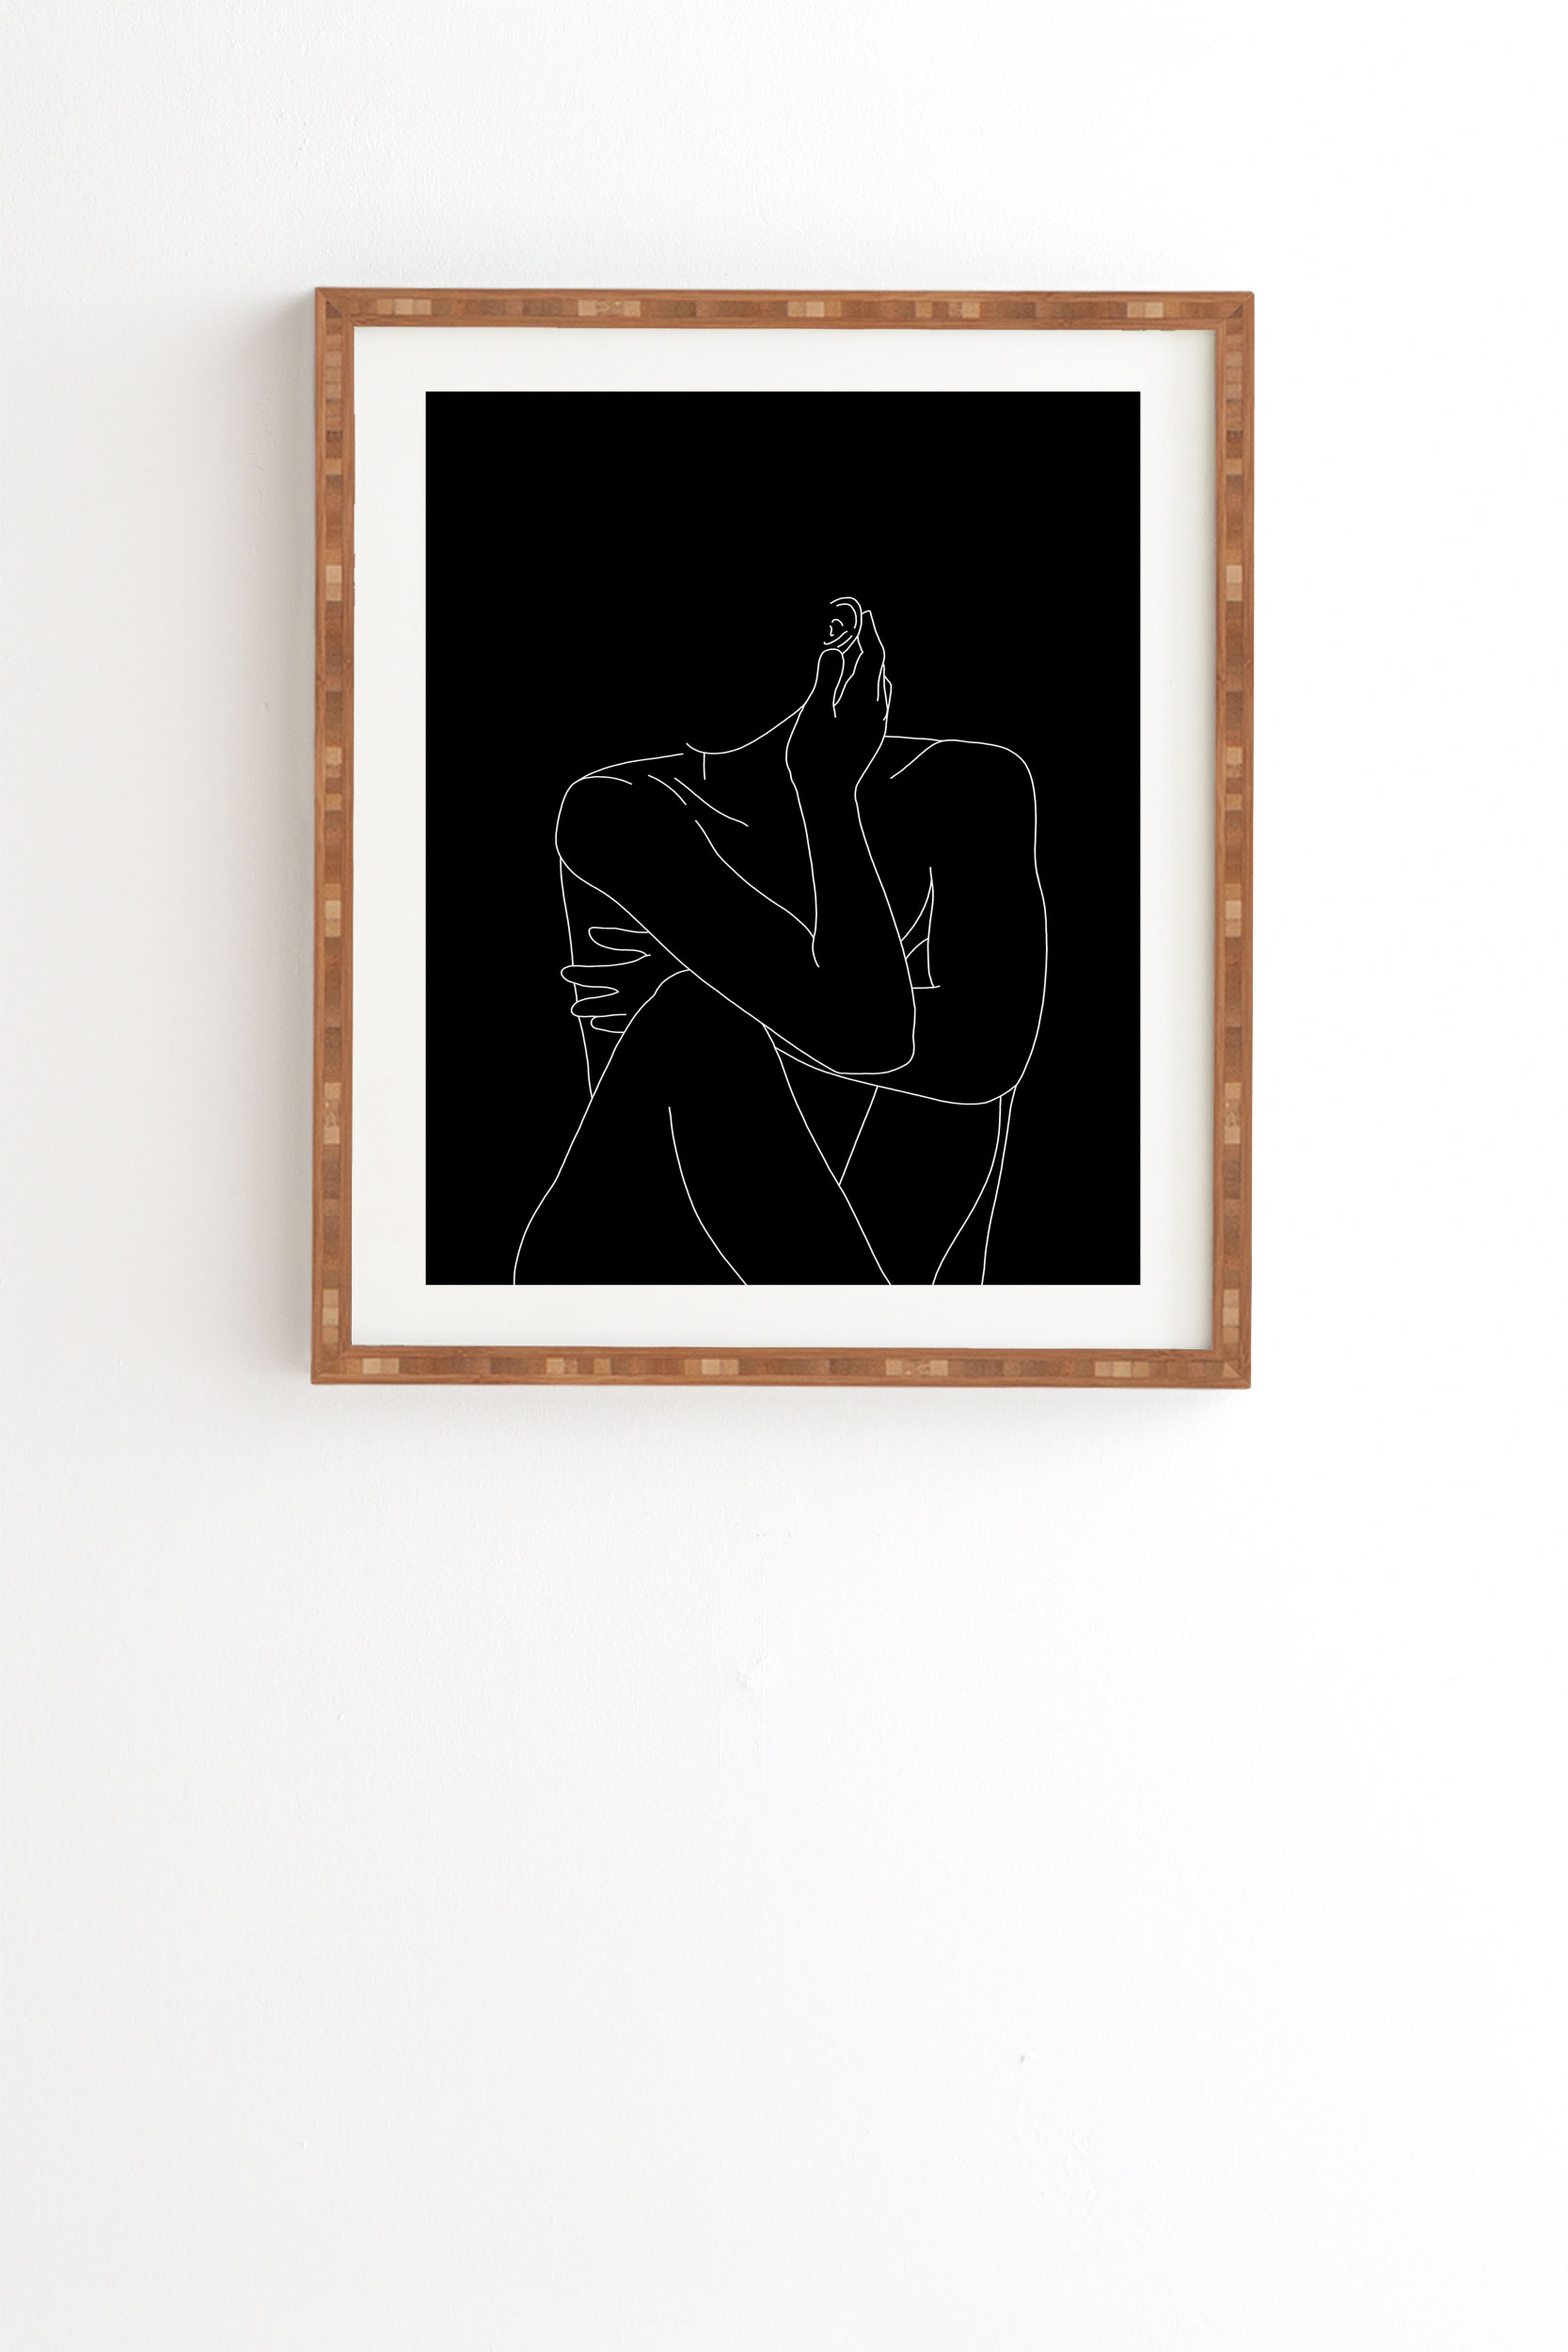 Nude Figure Illustration Celi by The Colour Study - Framed Wall Art Bamboo 19" x 22.4" - Wander Print Co.